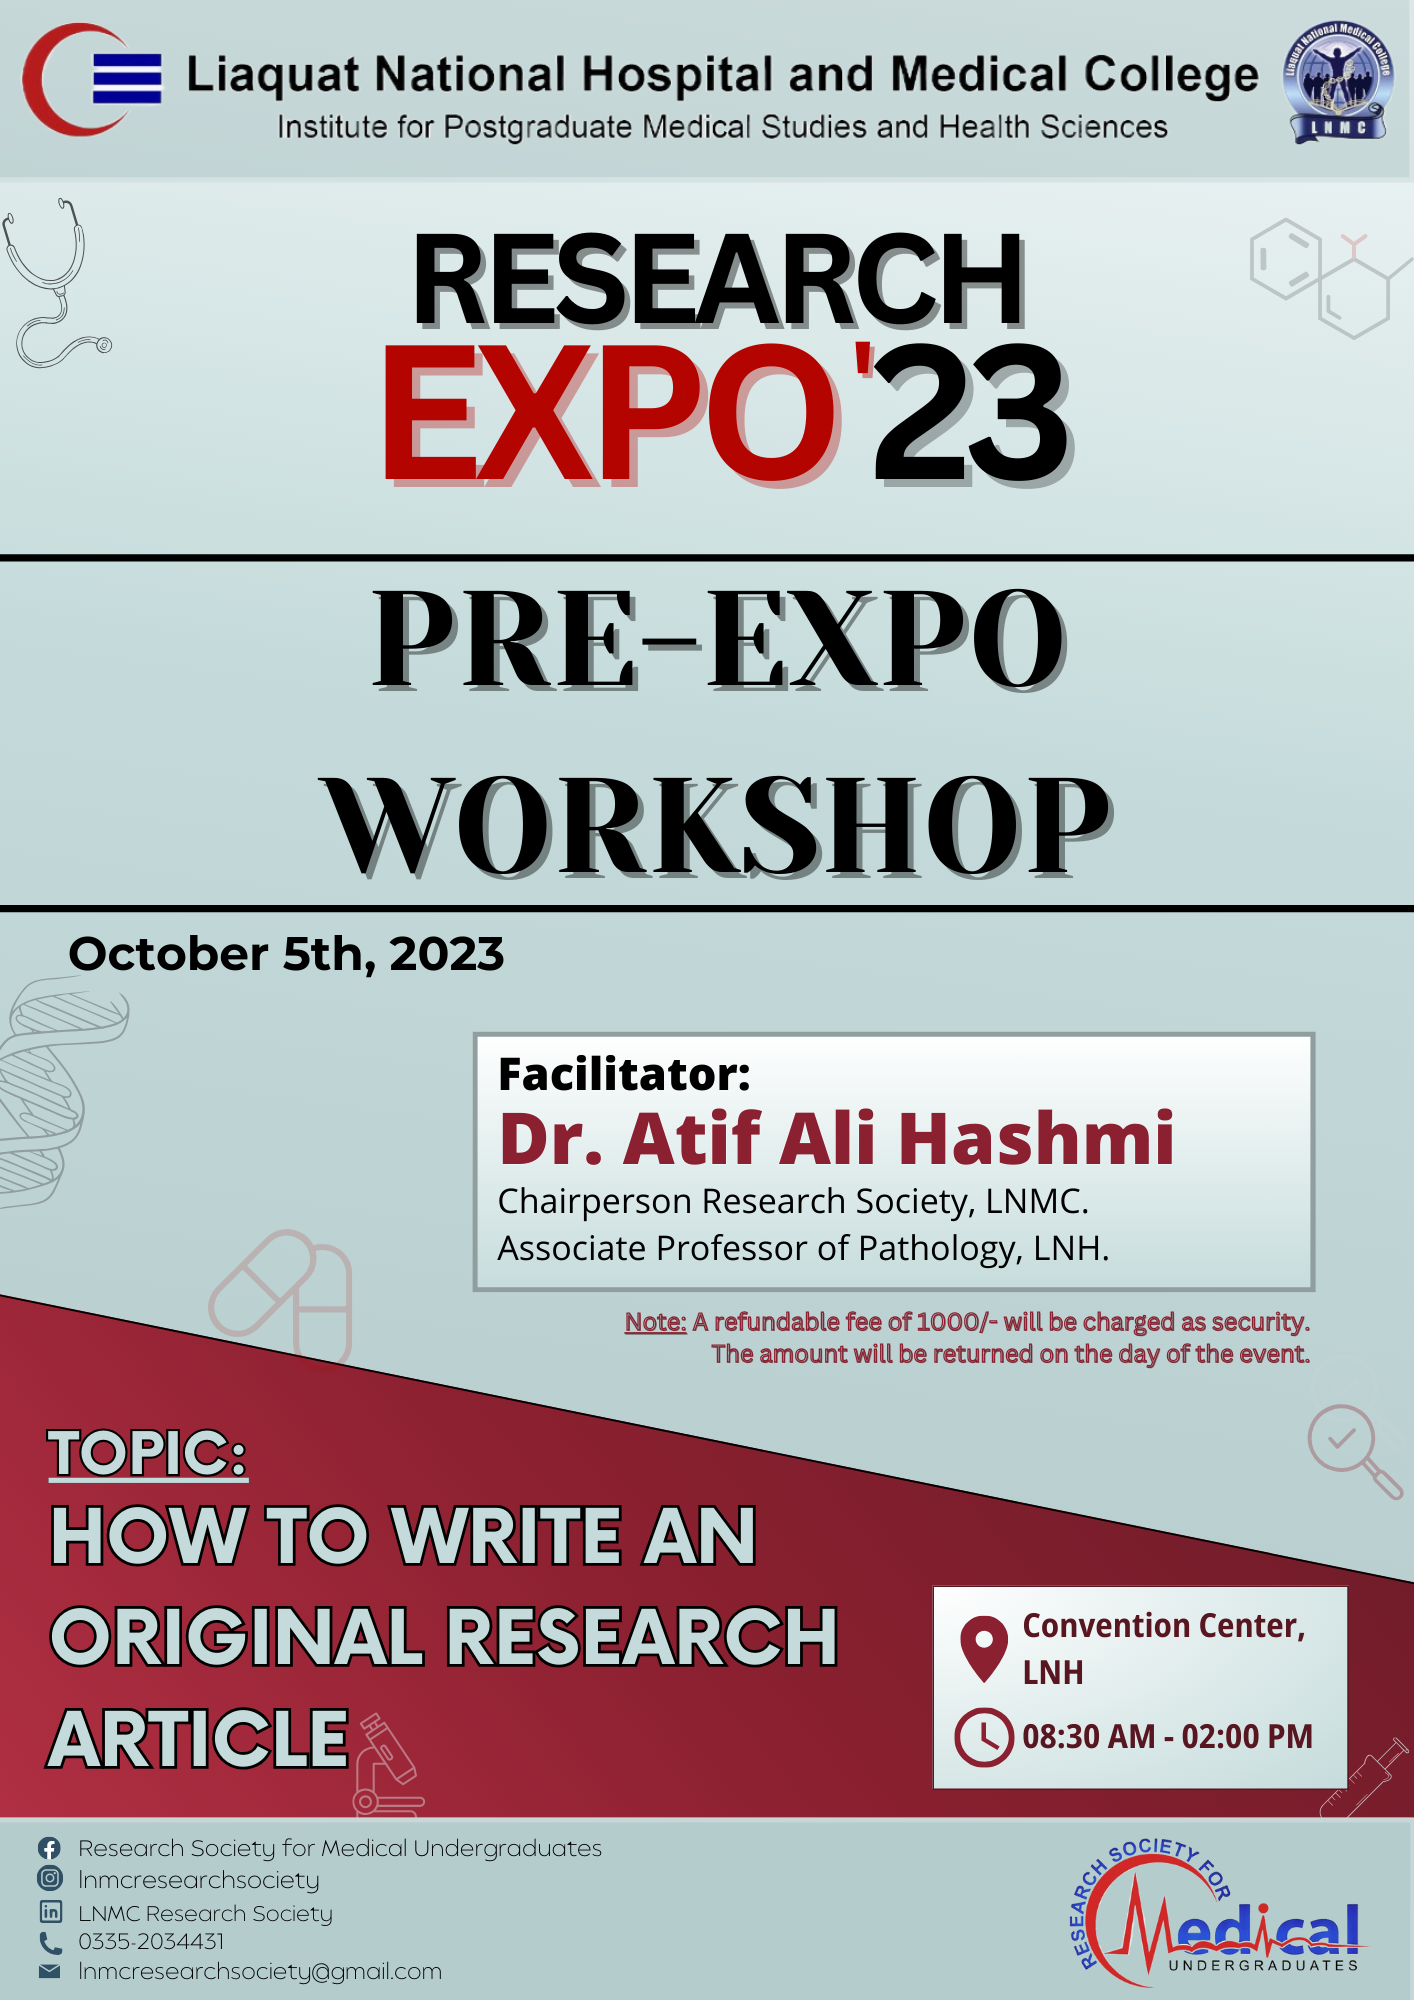 Research Expo: Pre- Expo Workshop on How to write an Original Research Article